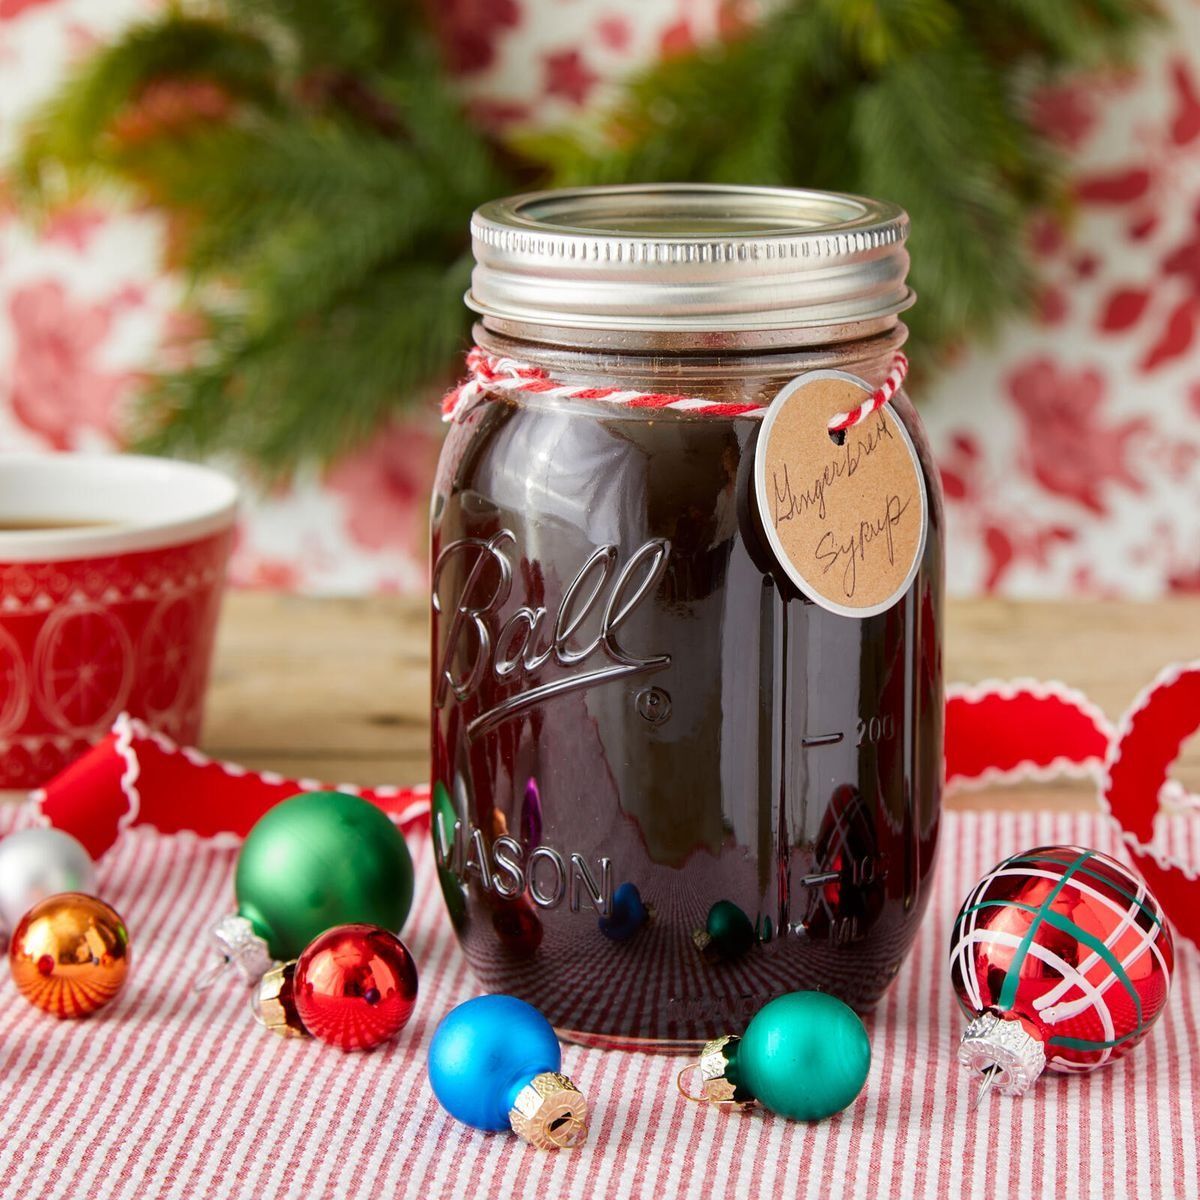 https://hips.hearstapps.com/hmg-prod/images/homemade-christmas-food-gifts-gingerbread-spiced-syrup-65664f2bad9c0.jpeg